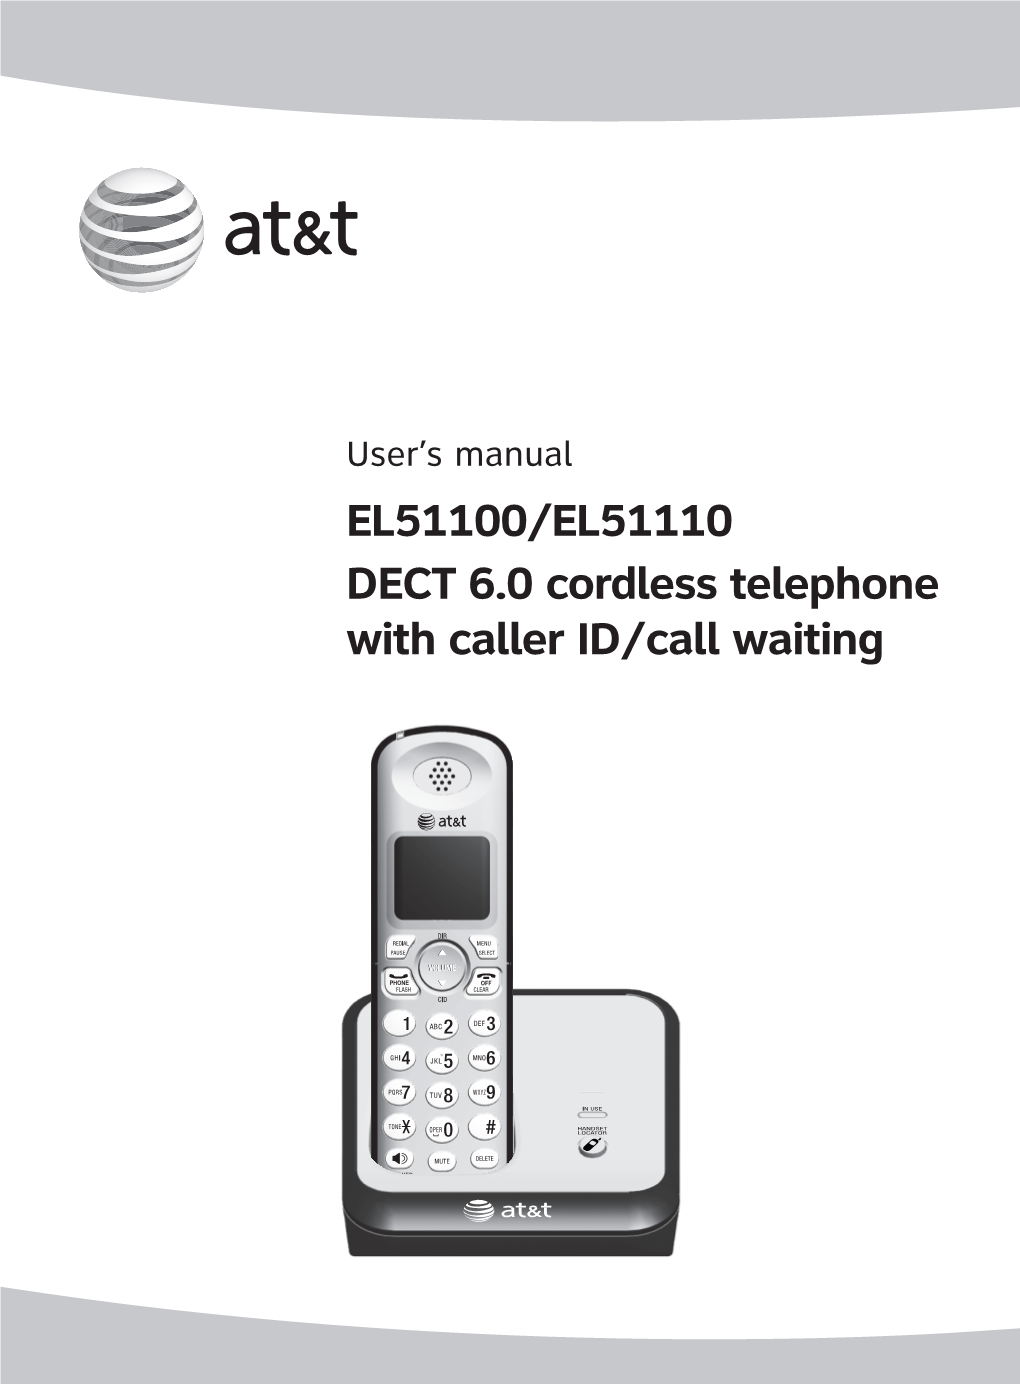 EL51100/EL51110 DECT 6.0 Cordless Telephone with Caller ID/Call Waiting Congratulations on Purchasing Your New AT&T Product